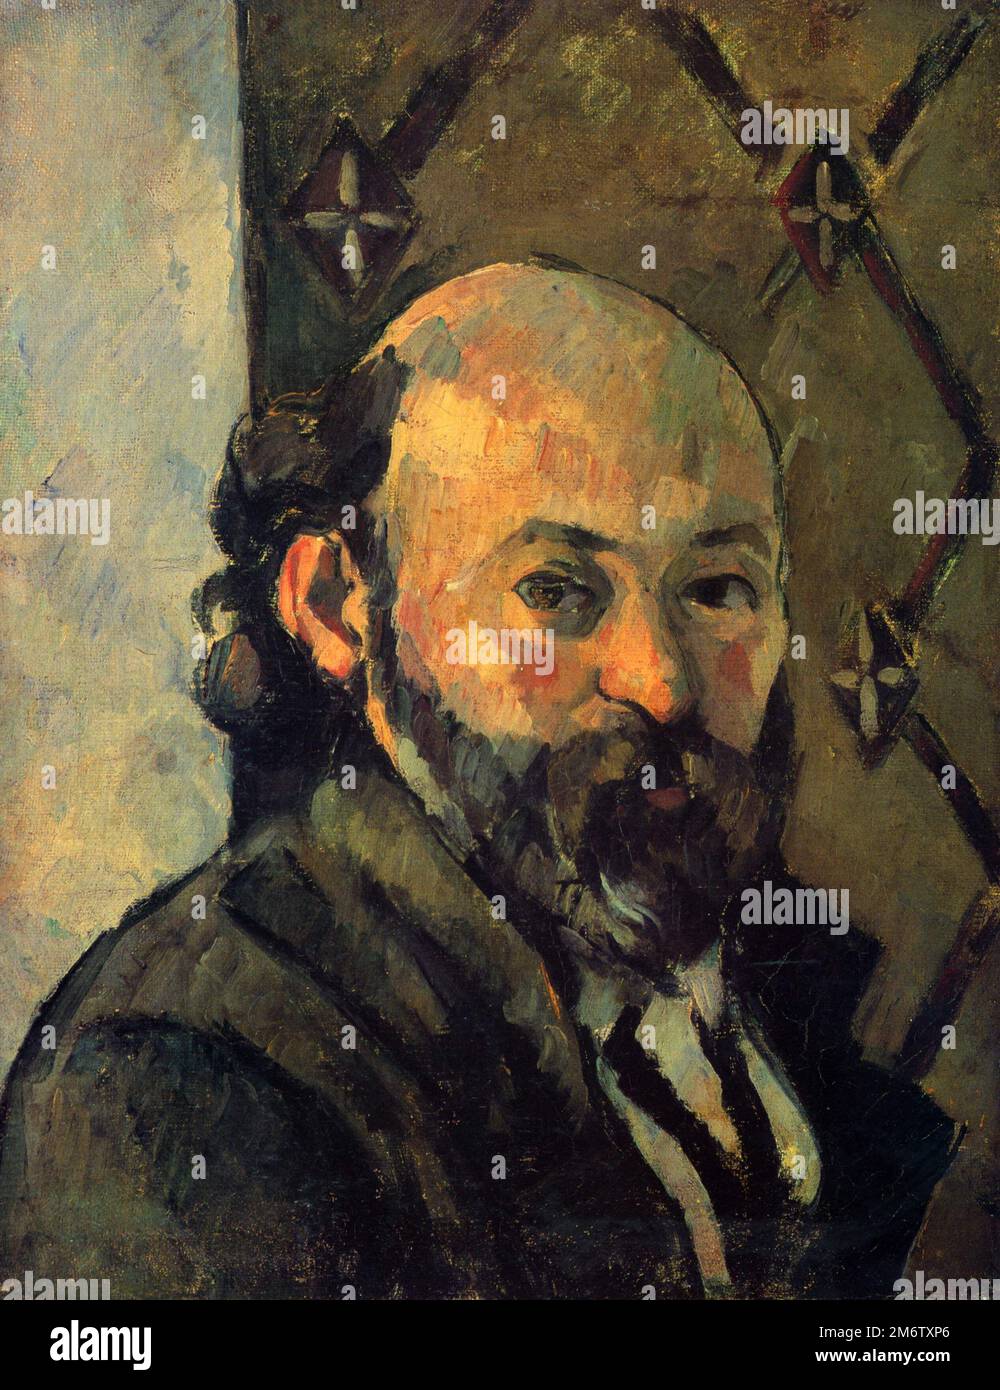 Self-portrait painted by French impressionist Paul Cézanne in 1880 Stock Photo